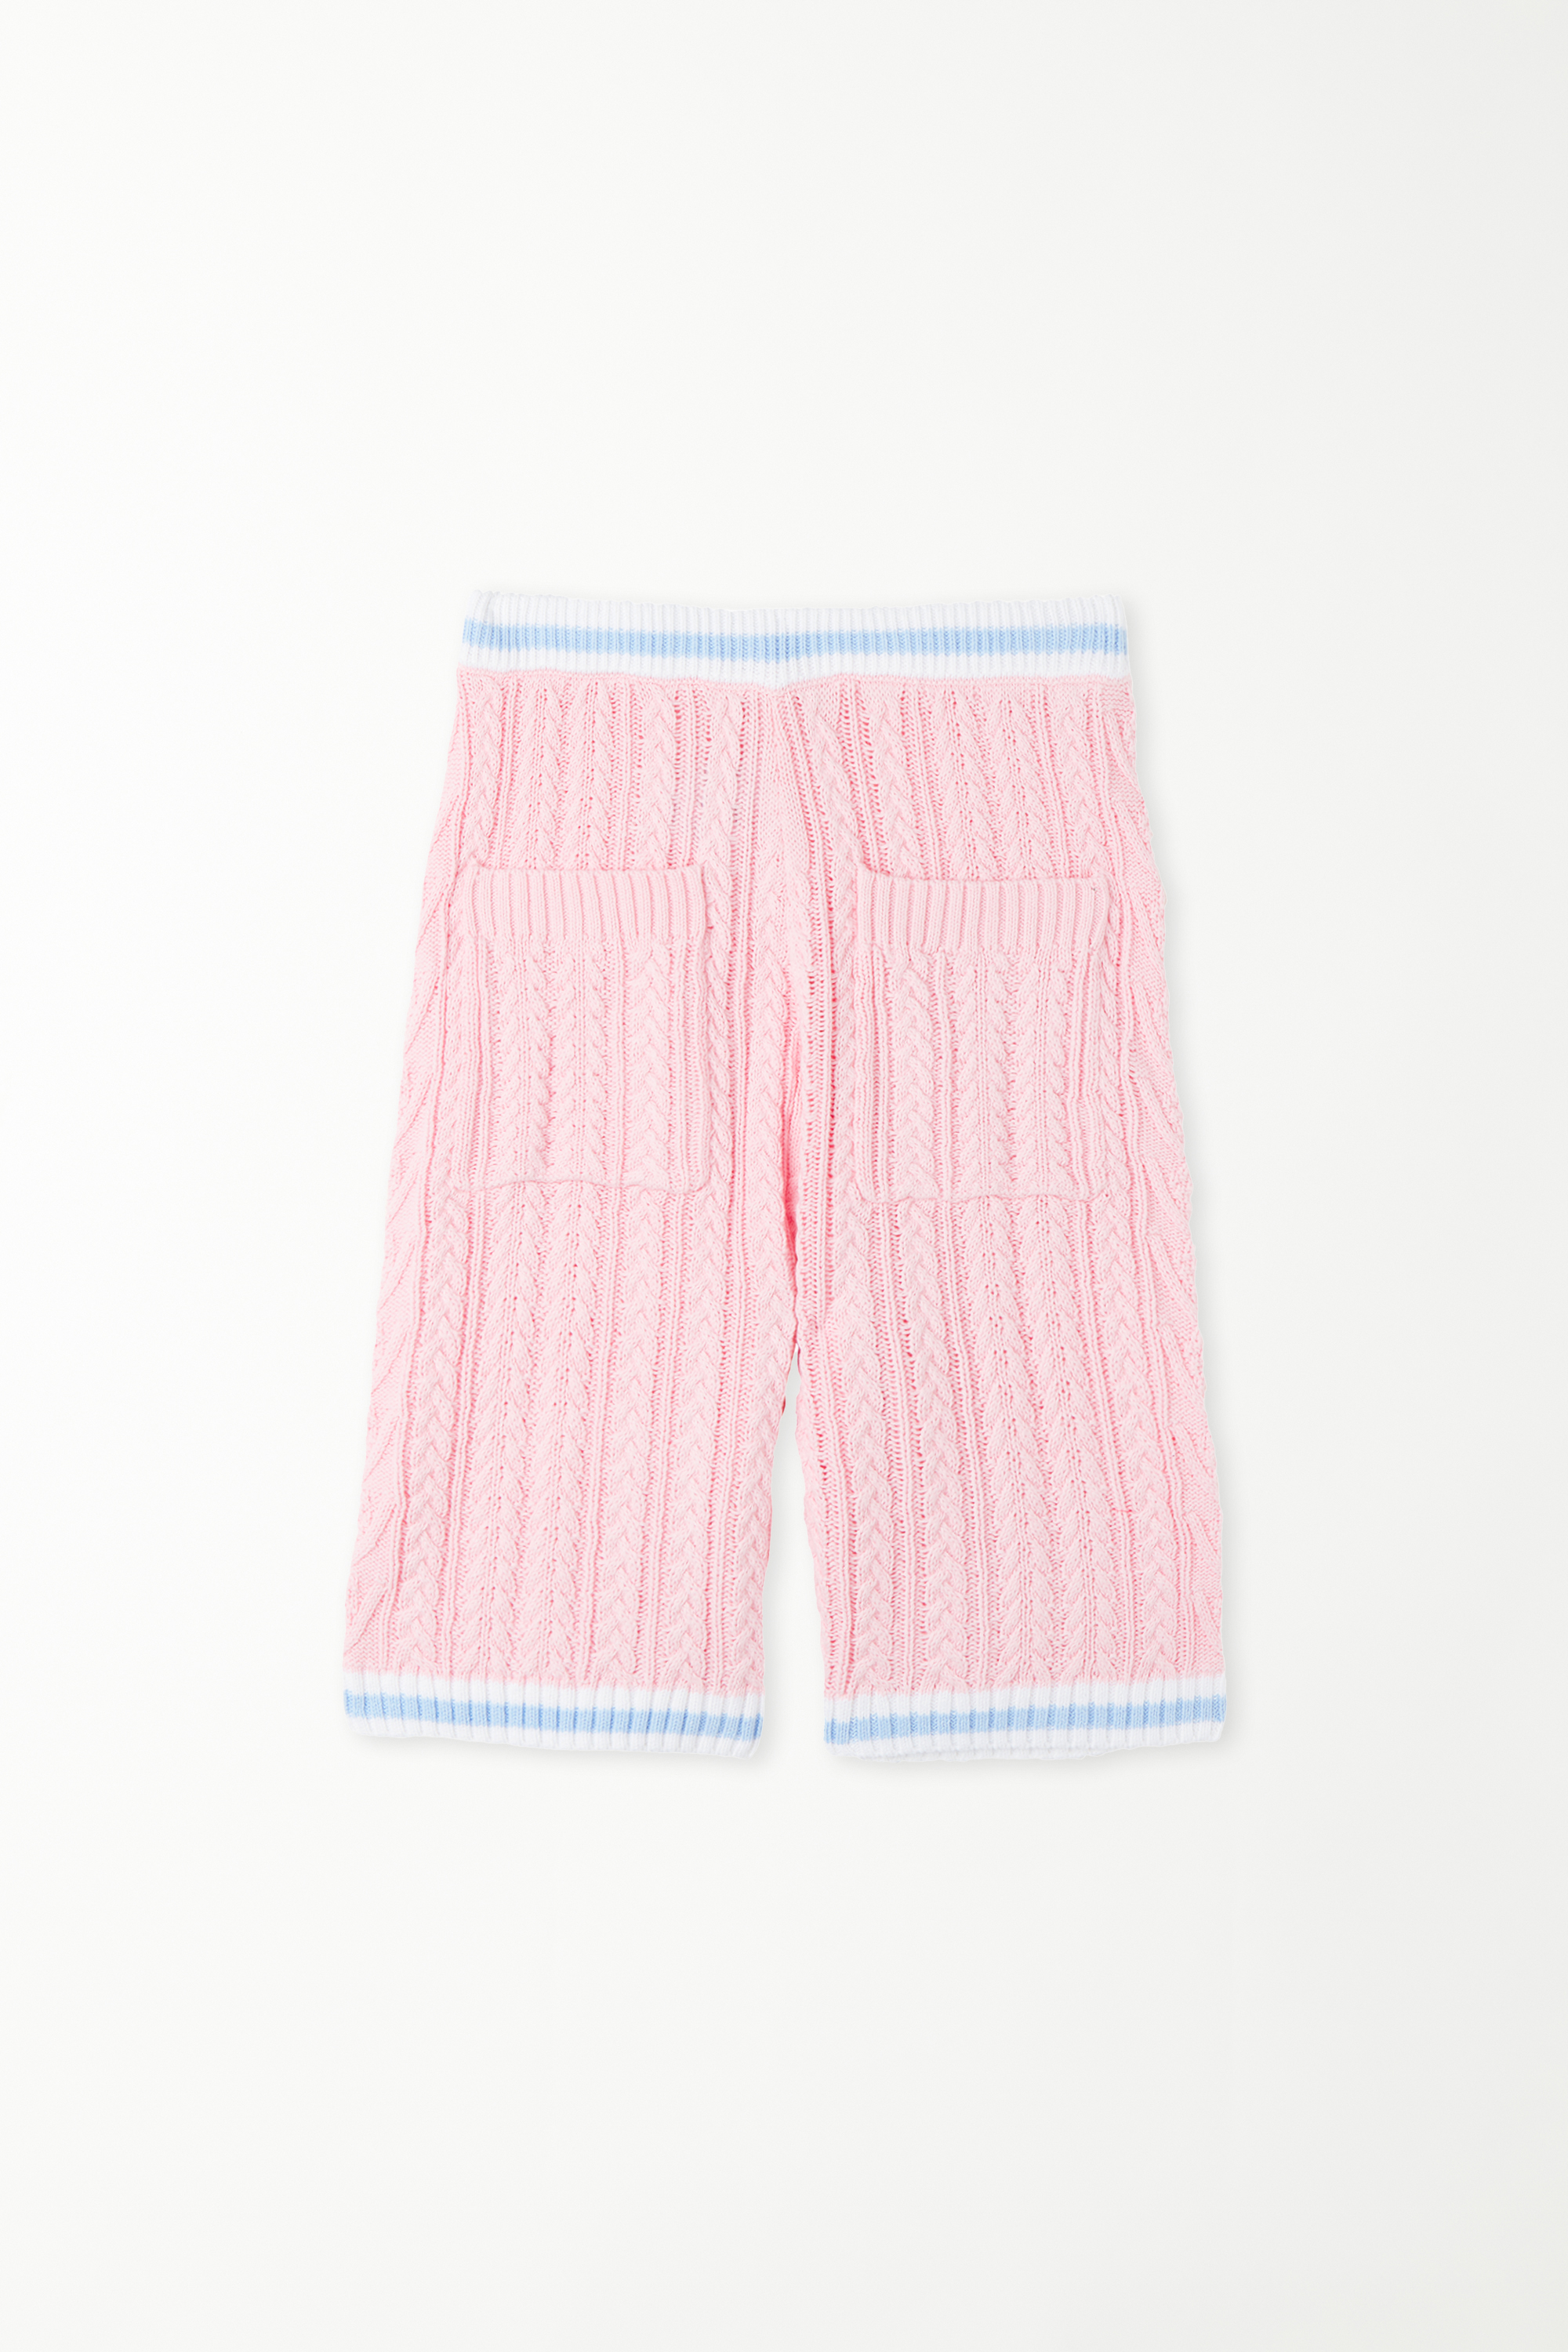 Fully Fashioned Cable-Knit Fabric Shorts with Pockets